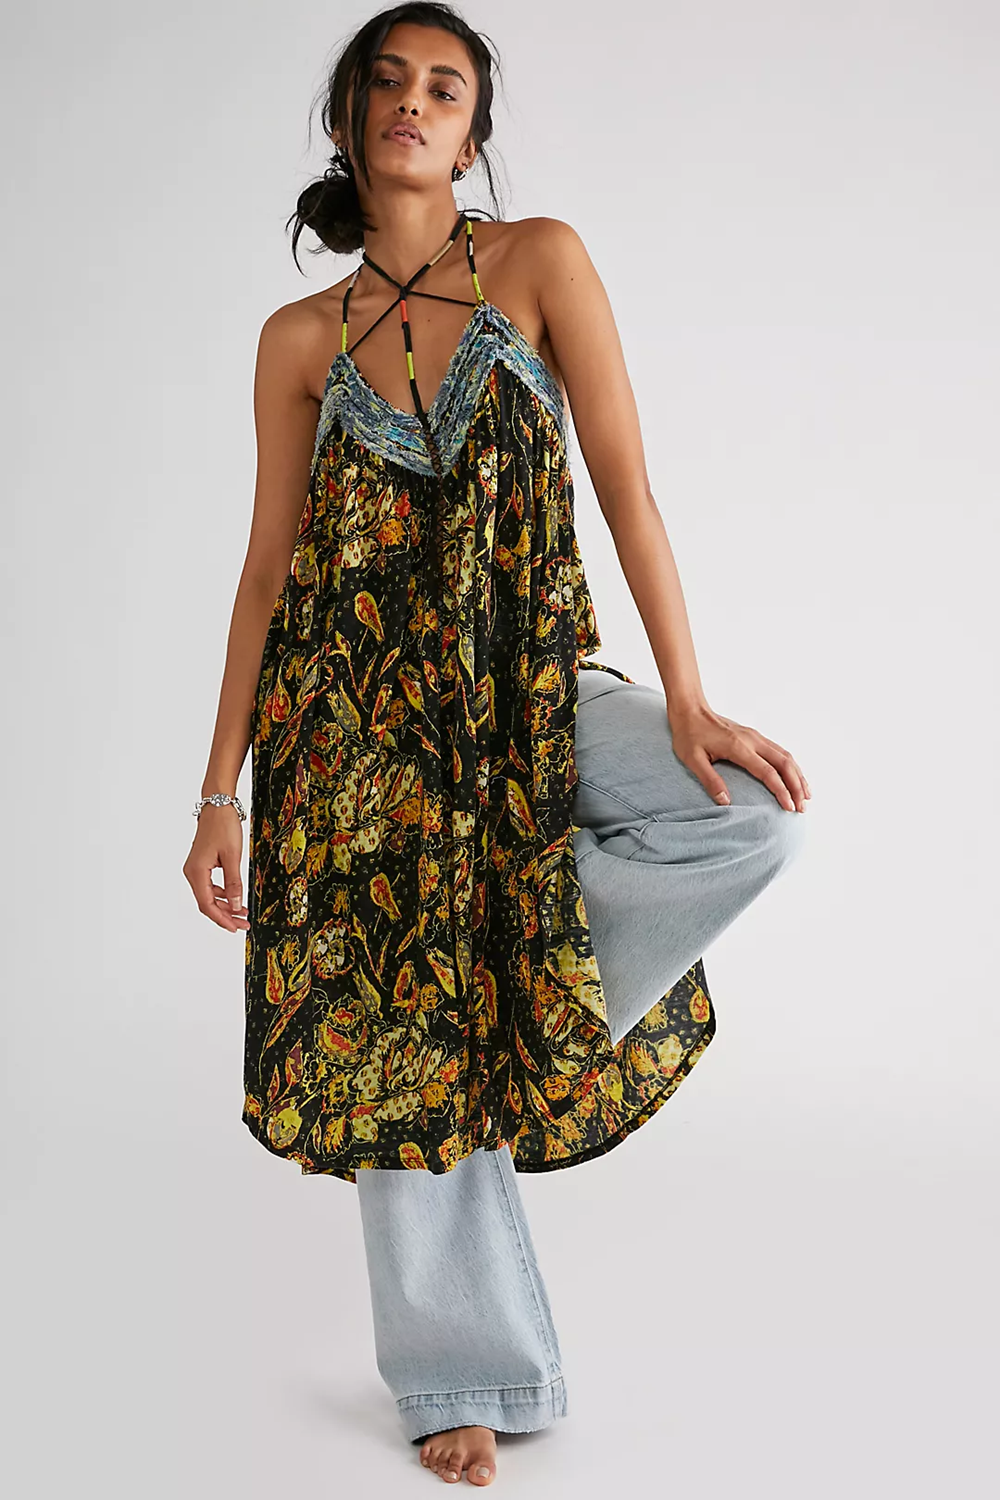 FREE PEOPLE GARDEN PARTY MAXI